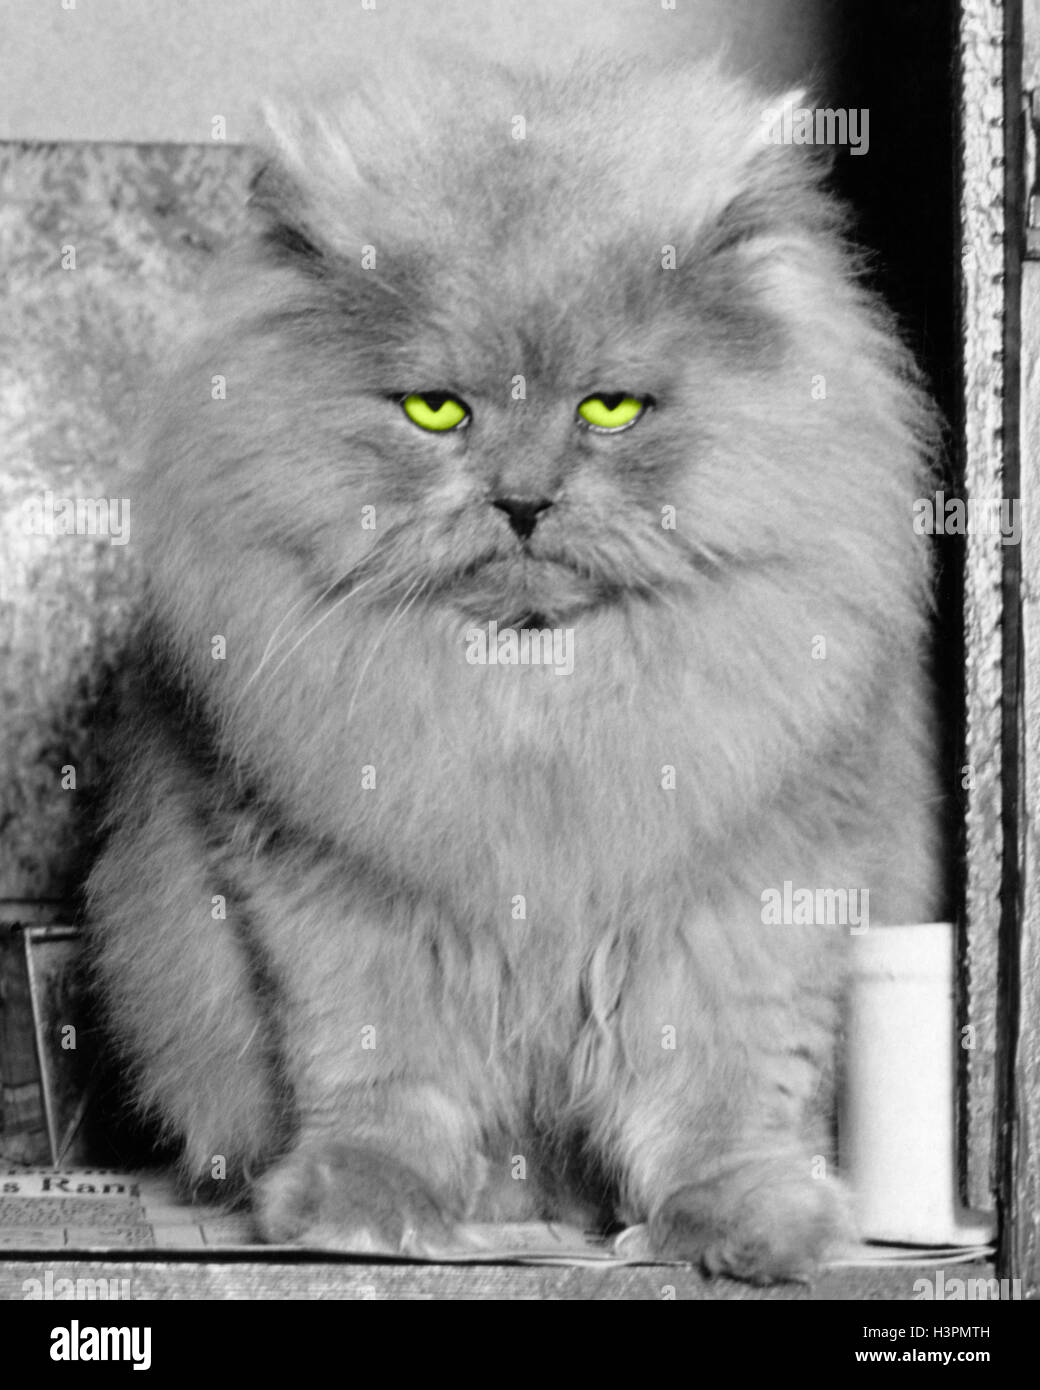 1940s LONG HAIR BLUE PERSIAN CAT LOOKING AT CAMERA WITH A GRUMPY ANNOYED ANGRY MEAN FACIAL EXPRESSION Stock Photo